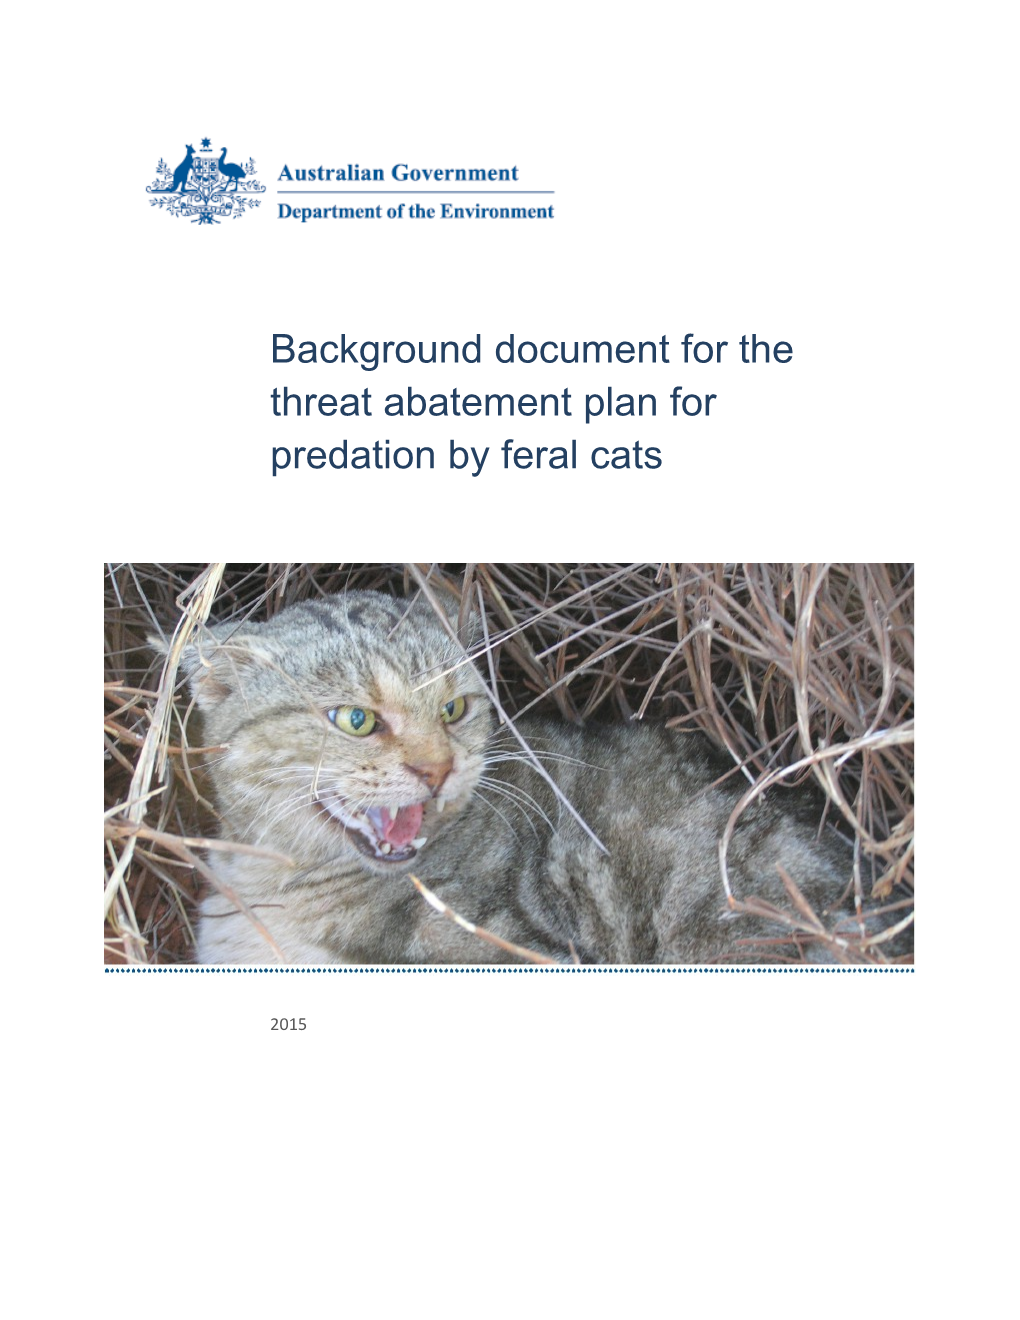 Backgrod Document for the Threat Abatement Plan for Predation by Feral Cats